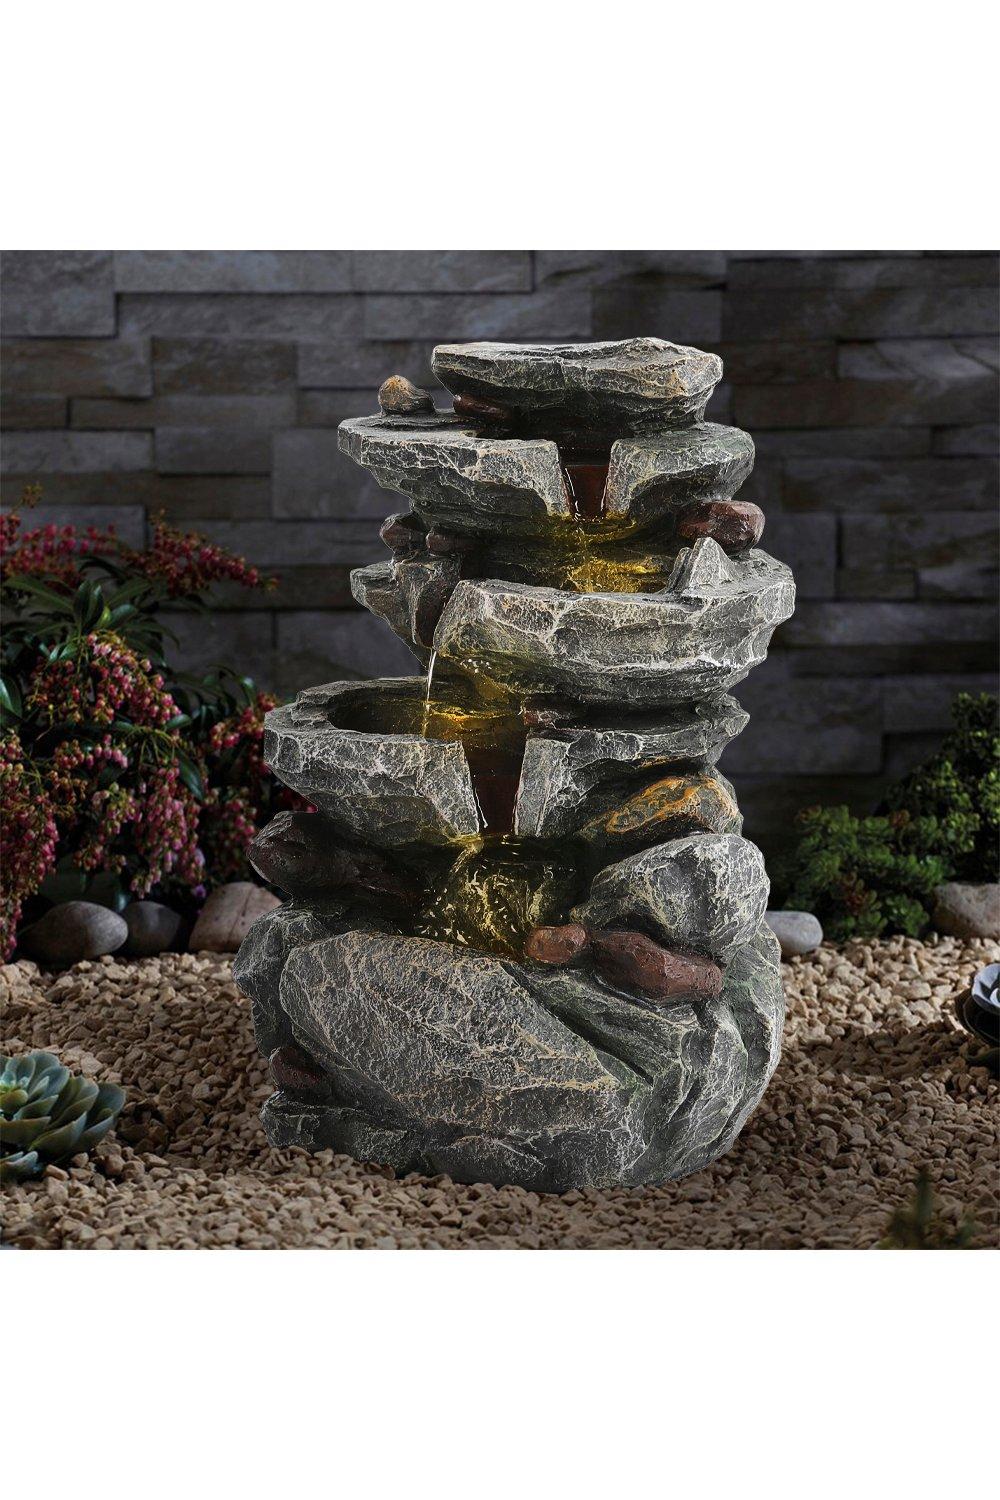 Outdoor Water Feature Fountain Decor with Lights